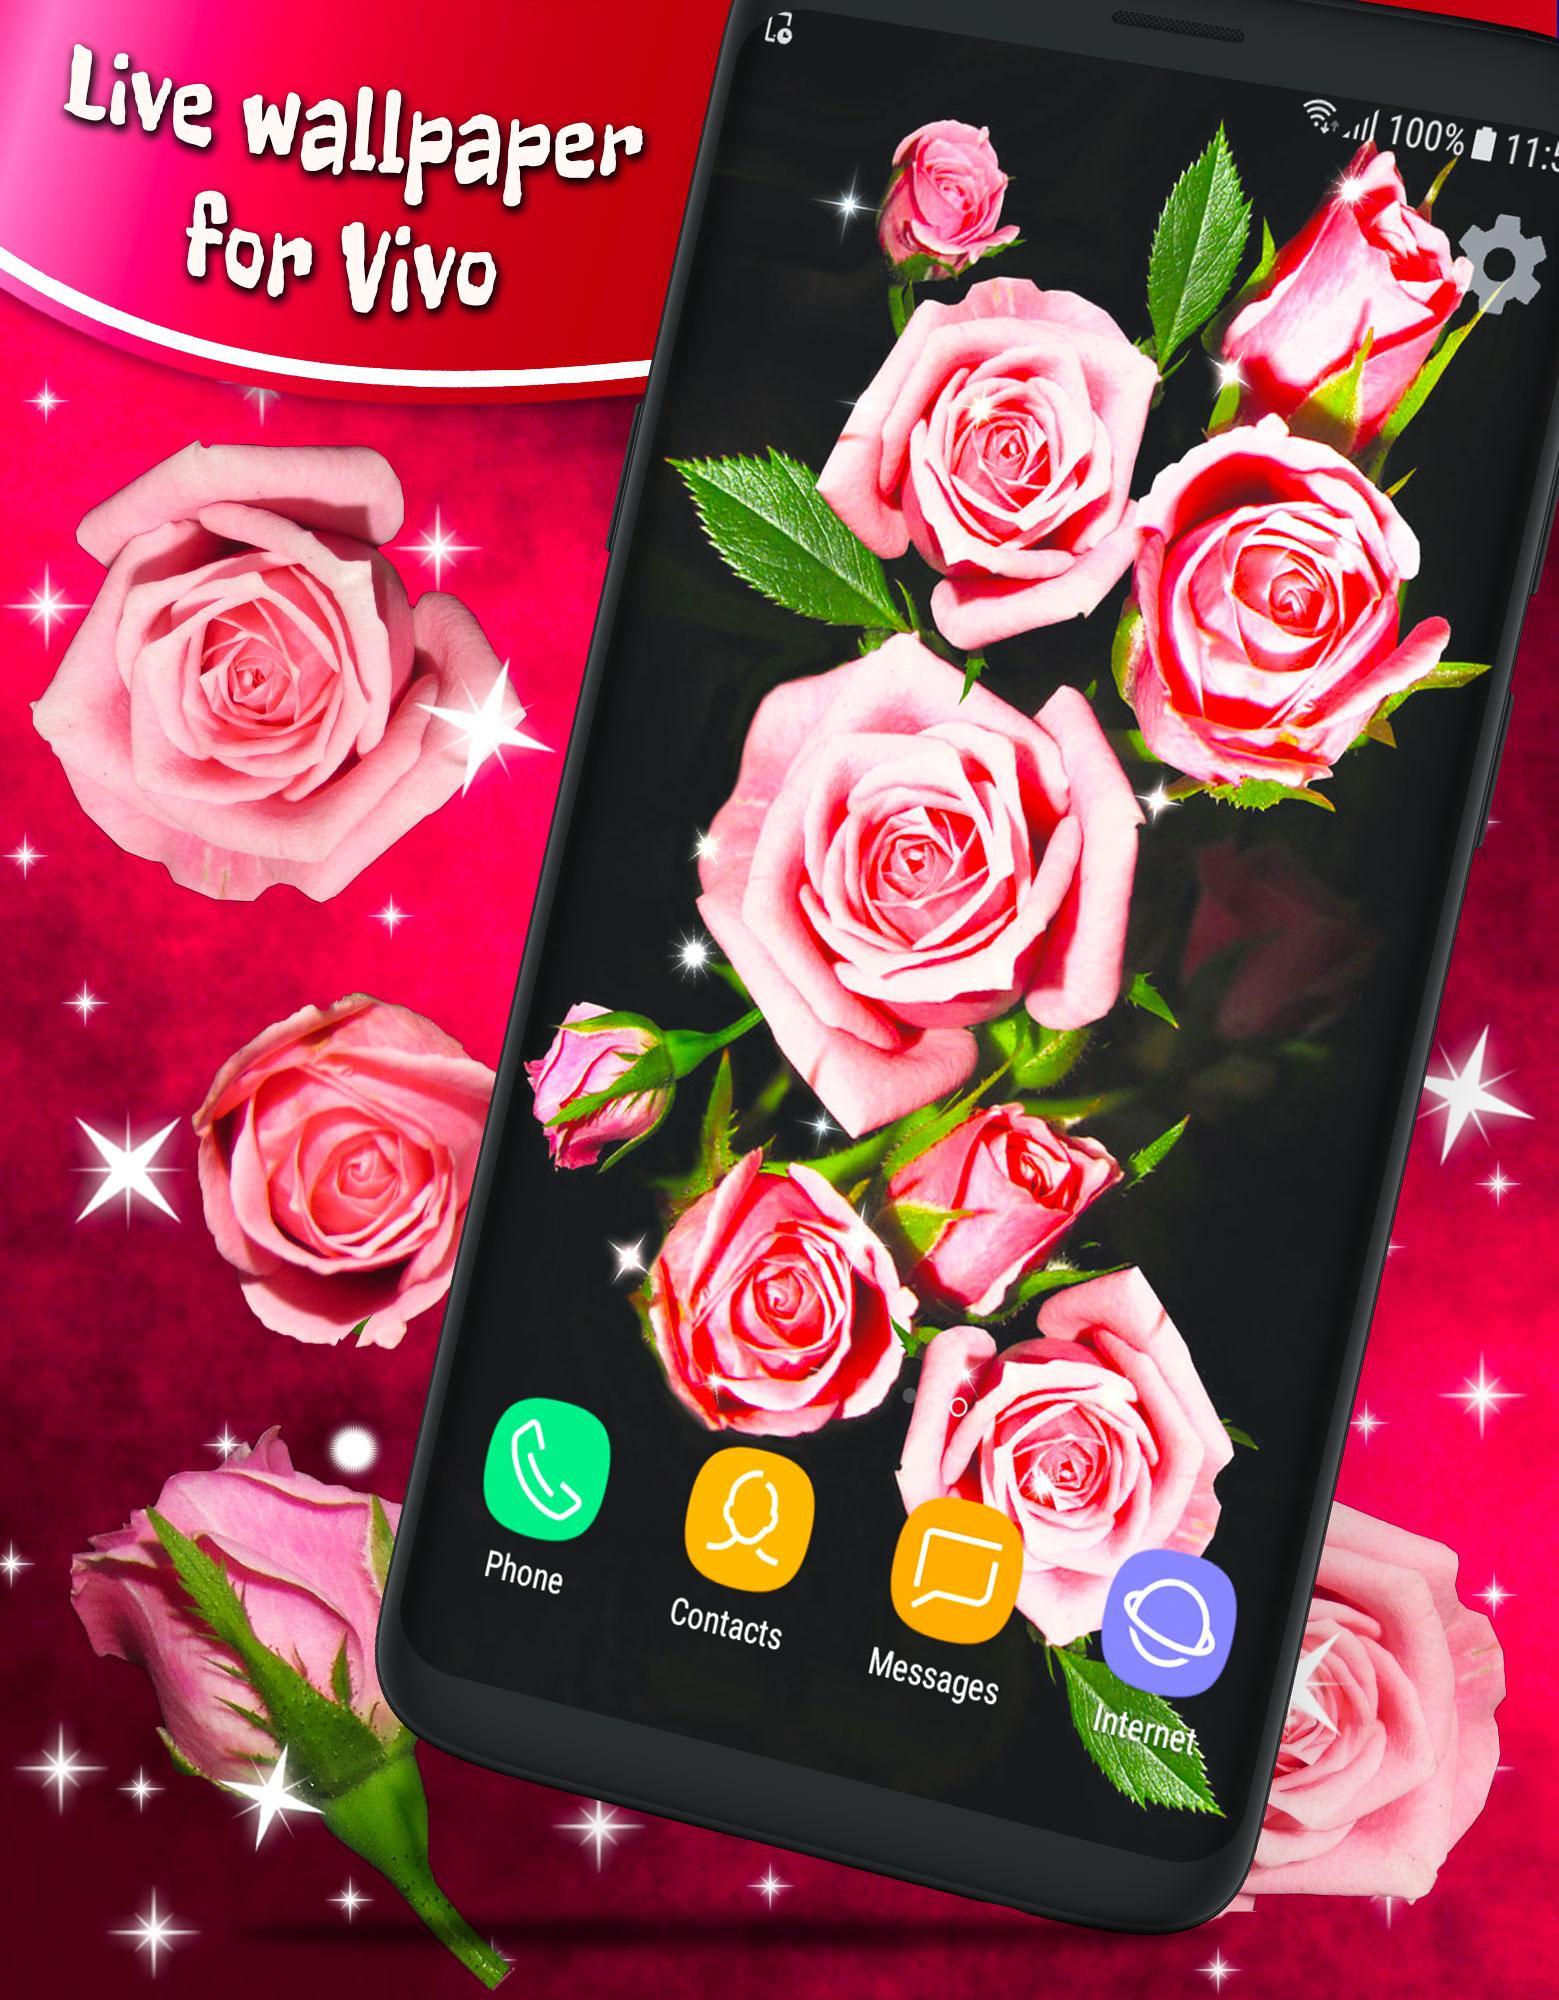 Live Wallpaper for Vivo ⭐ 4K Wallpapers Themes for Android - APK Download